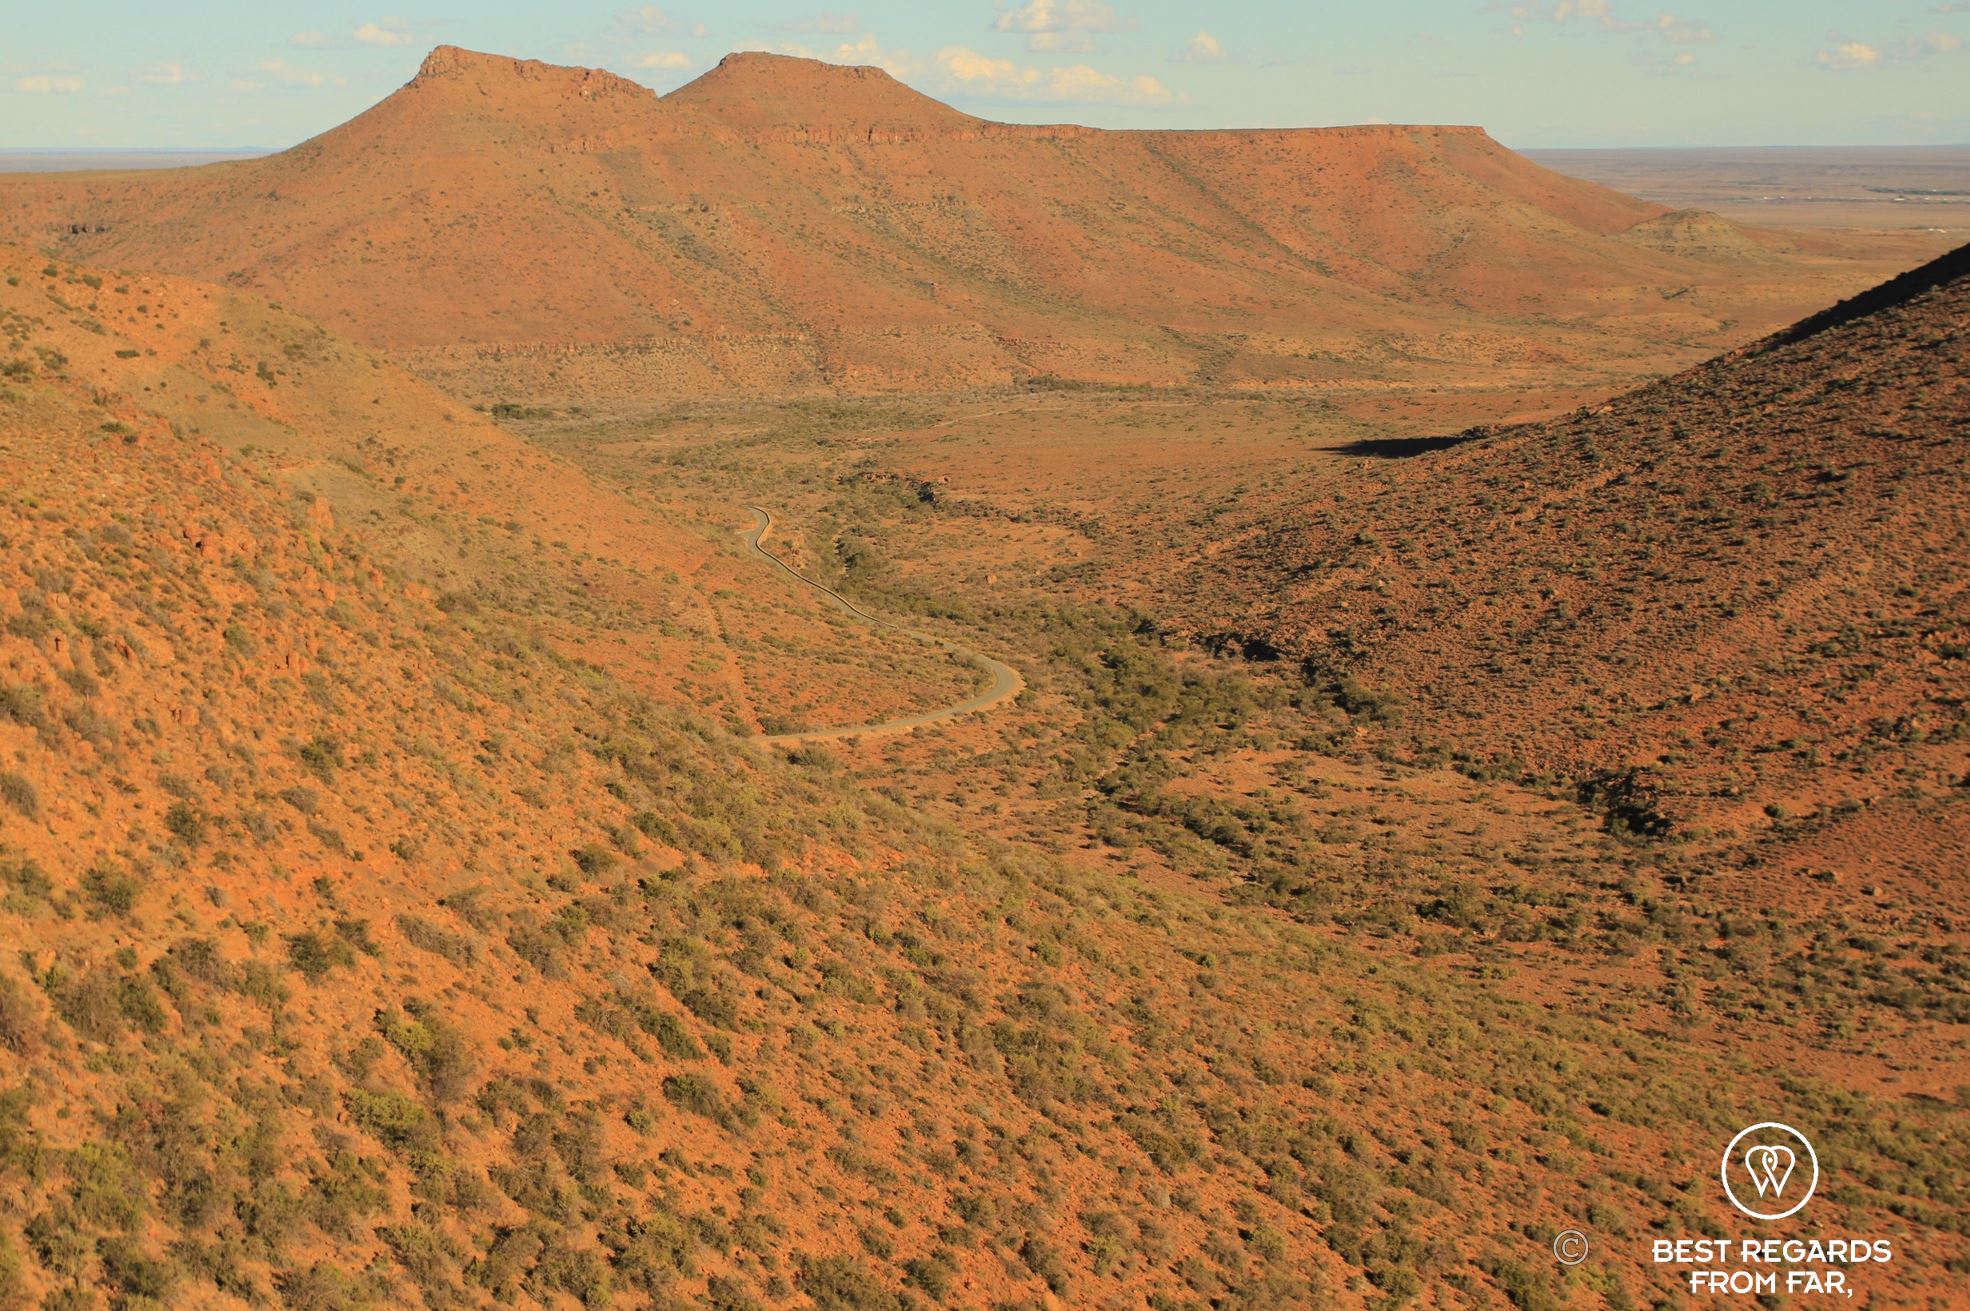 Red dry and hilly landscape with one road going through, Karoo NP, South Africa.